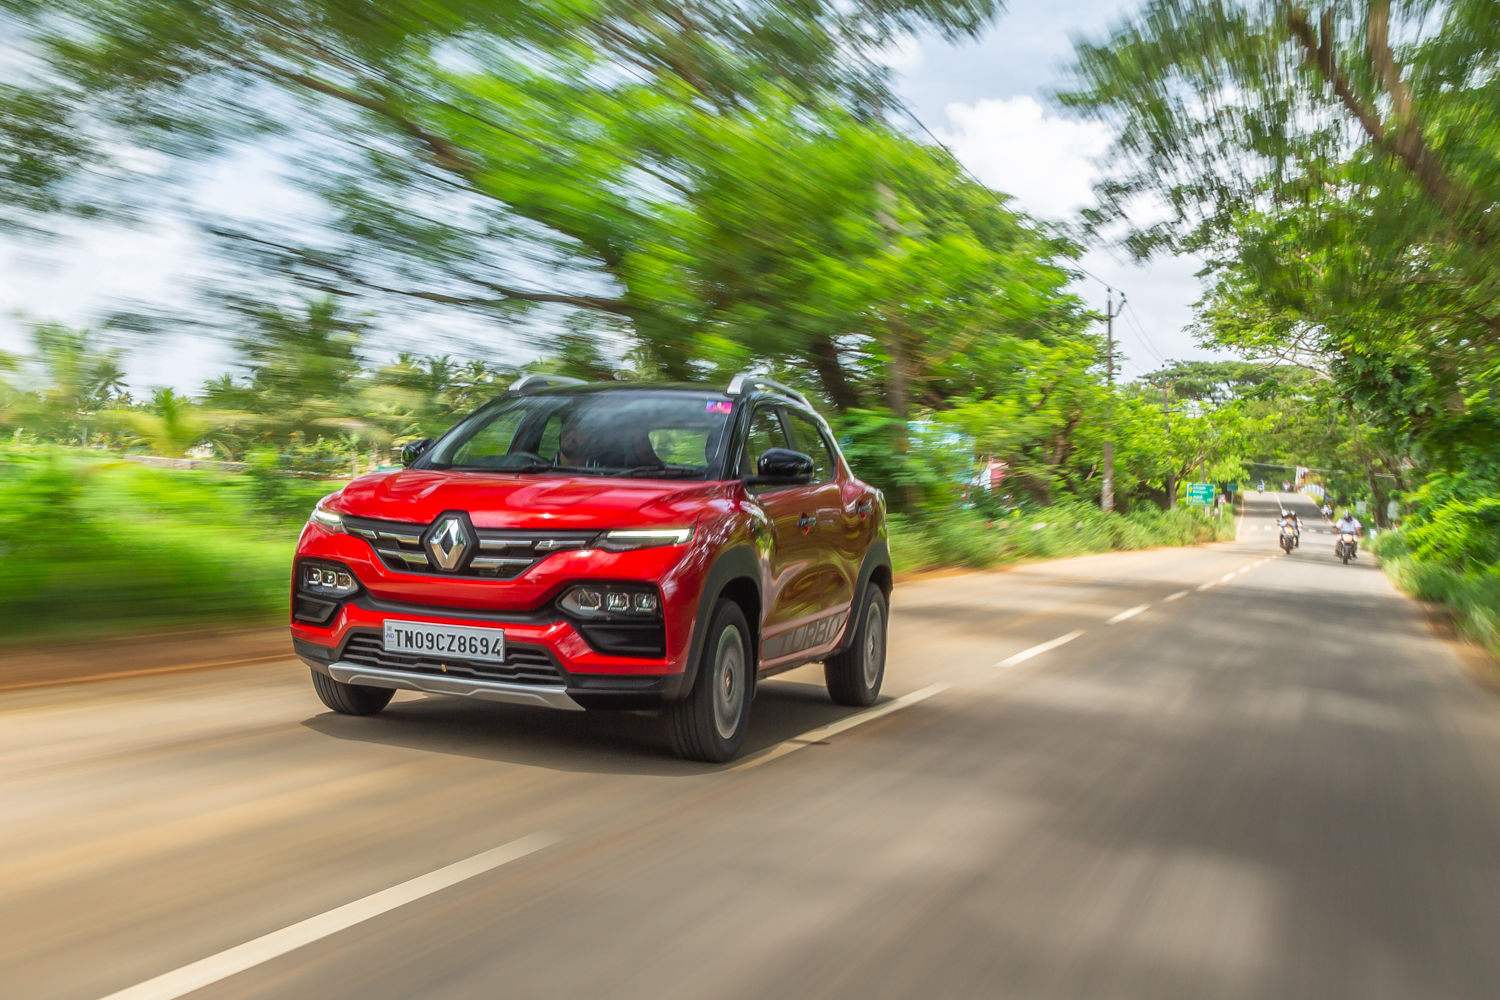 2022 Renault Kiger Turbo CVT Review: Do The Updates Make It More Likeable?